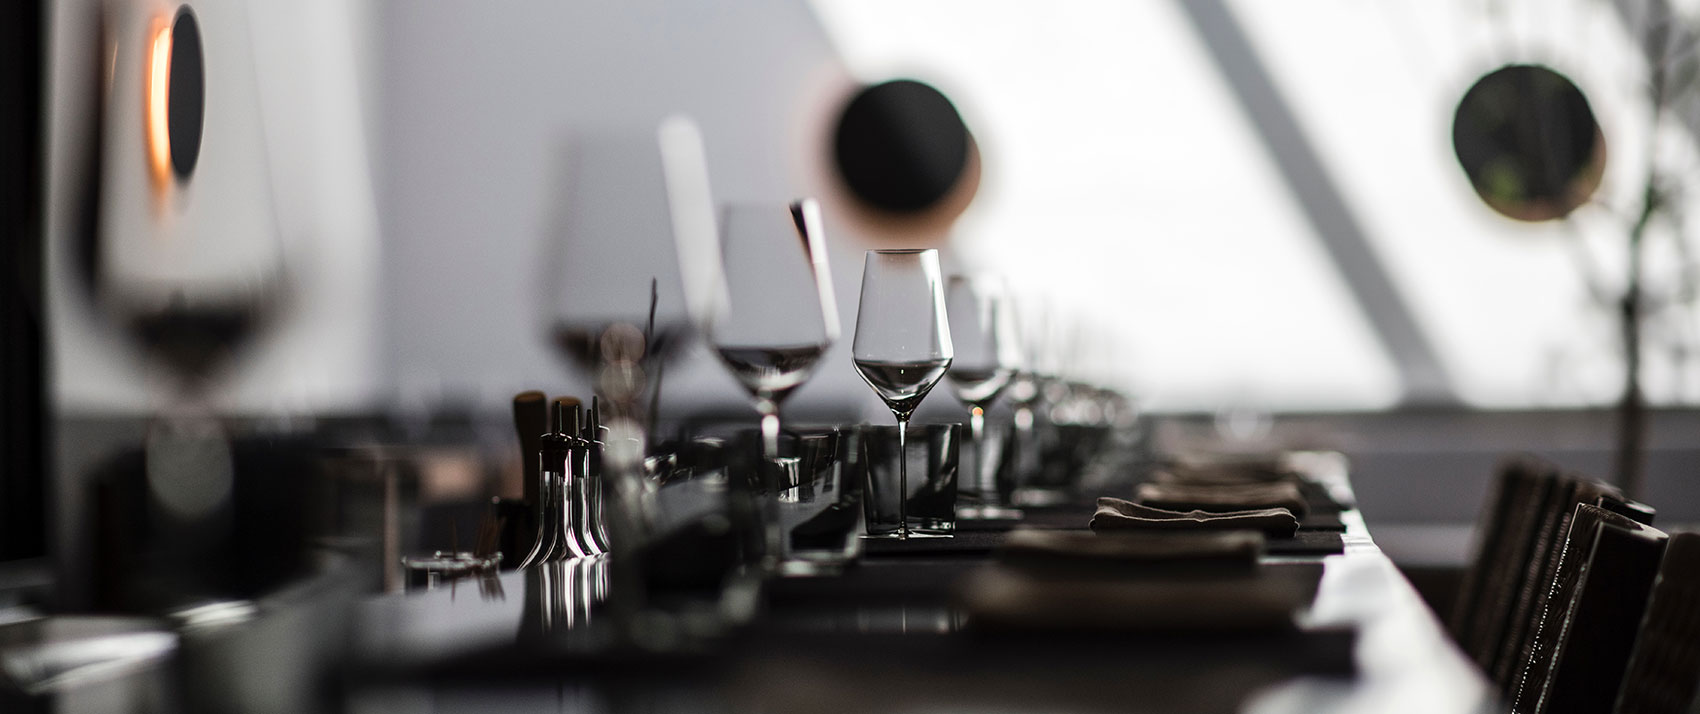 table of plates and wine glasses